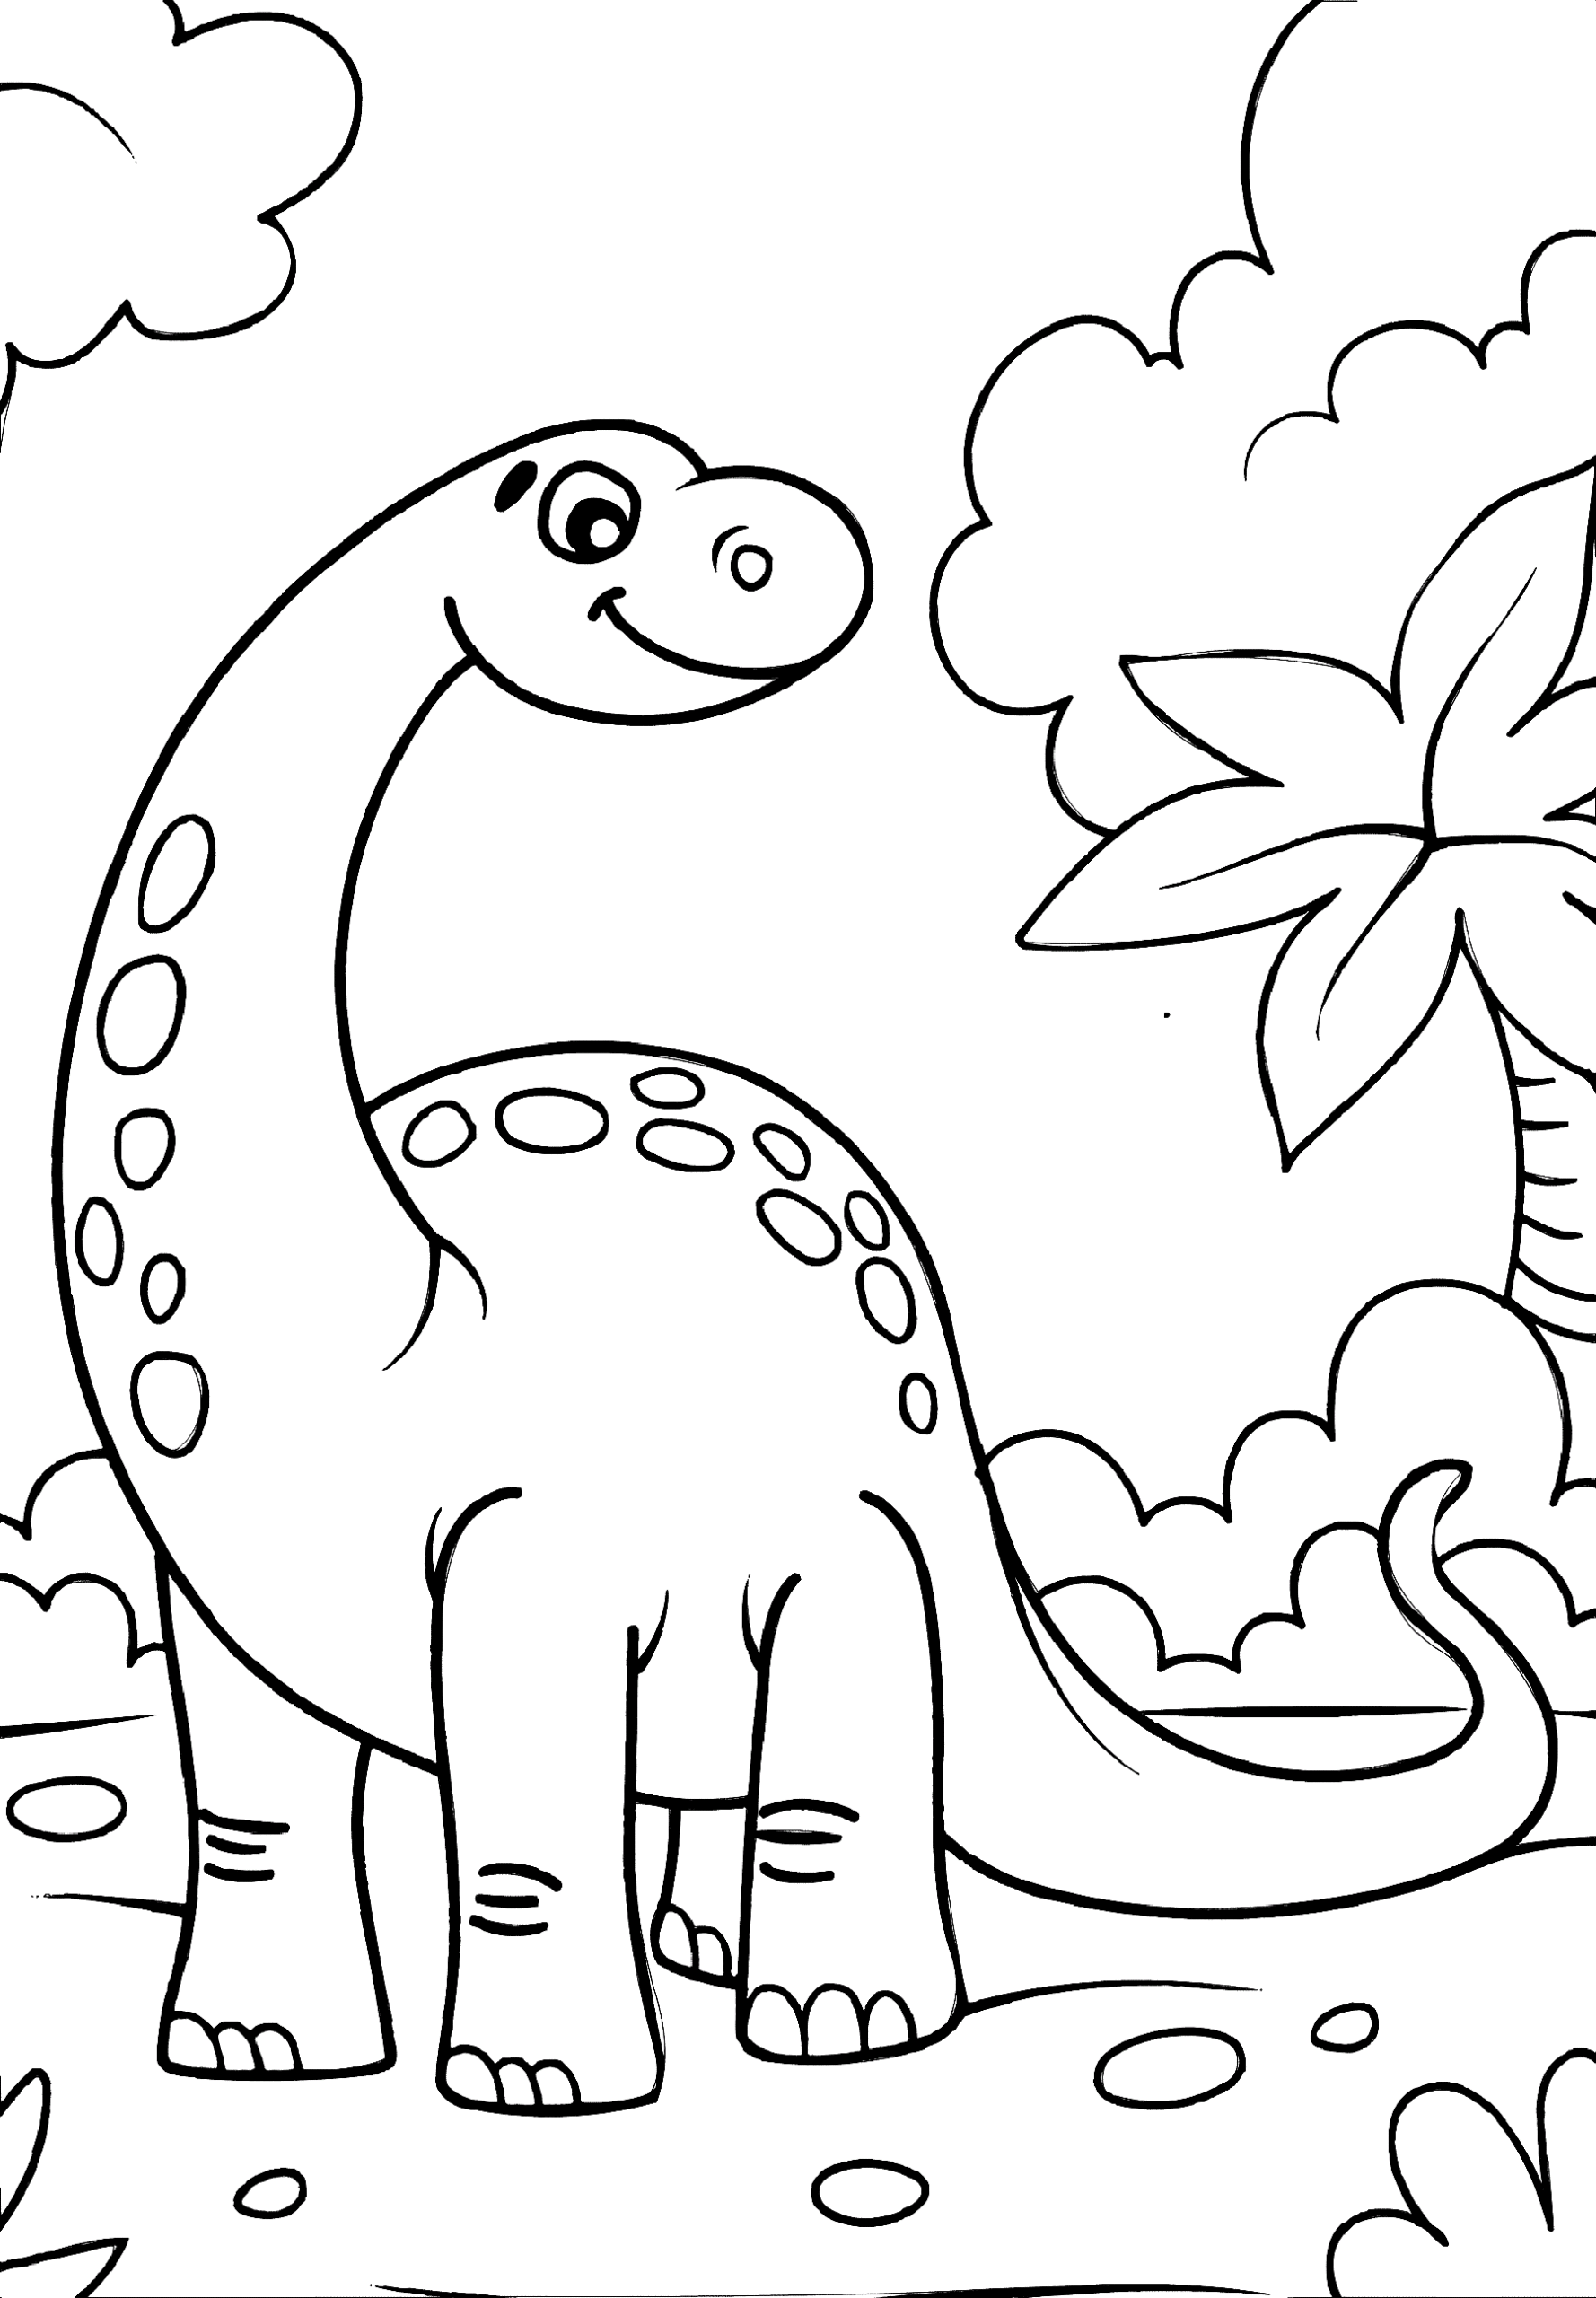 Dinosaur Coloring Pages (Updated) Printable PDF » Print Color Craft